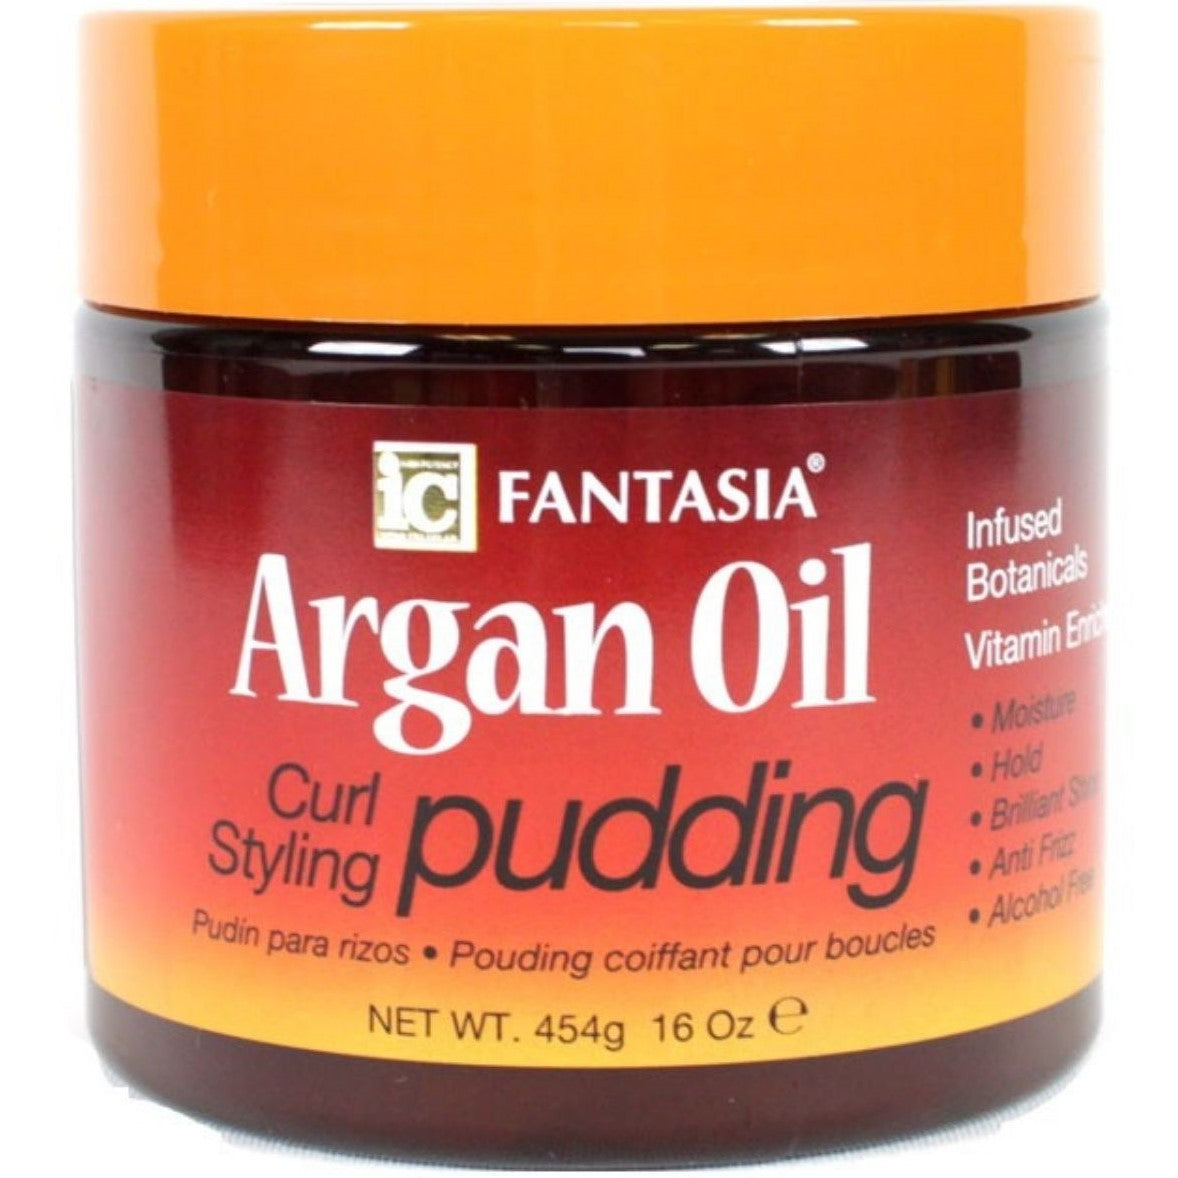 Fantasia IC Argan Oil Curl Styling Pudding 454 Gr